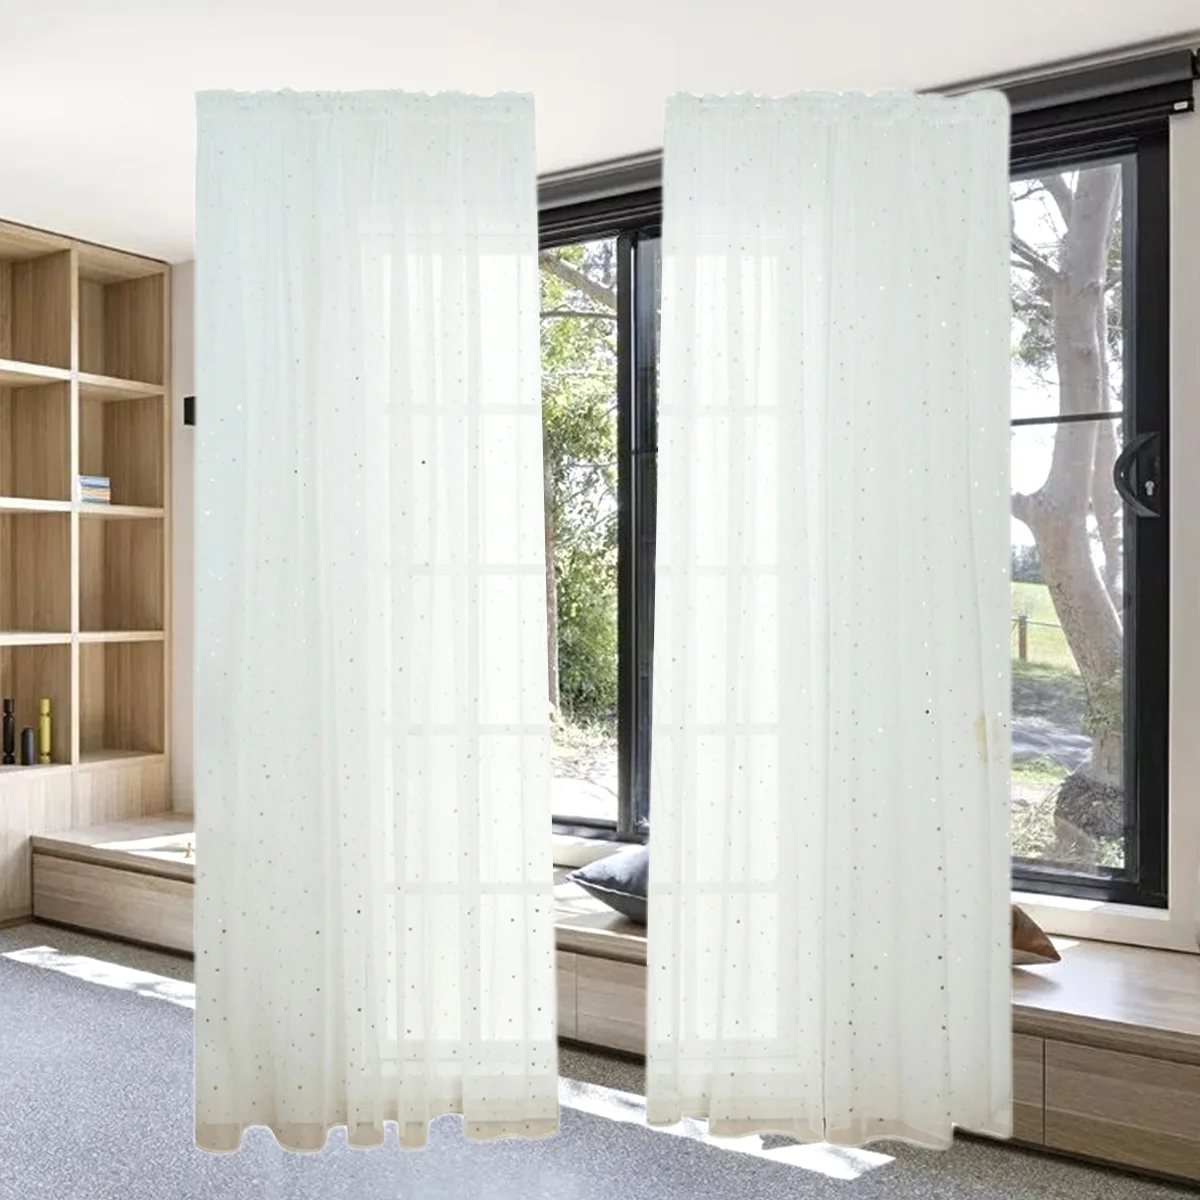 

Curtains Window Sheer Curtain Voile Star Tulle Panels Bedroom Drapes Room Screening Semi White Inches Screen Grommet Linen Girls